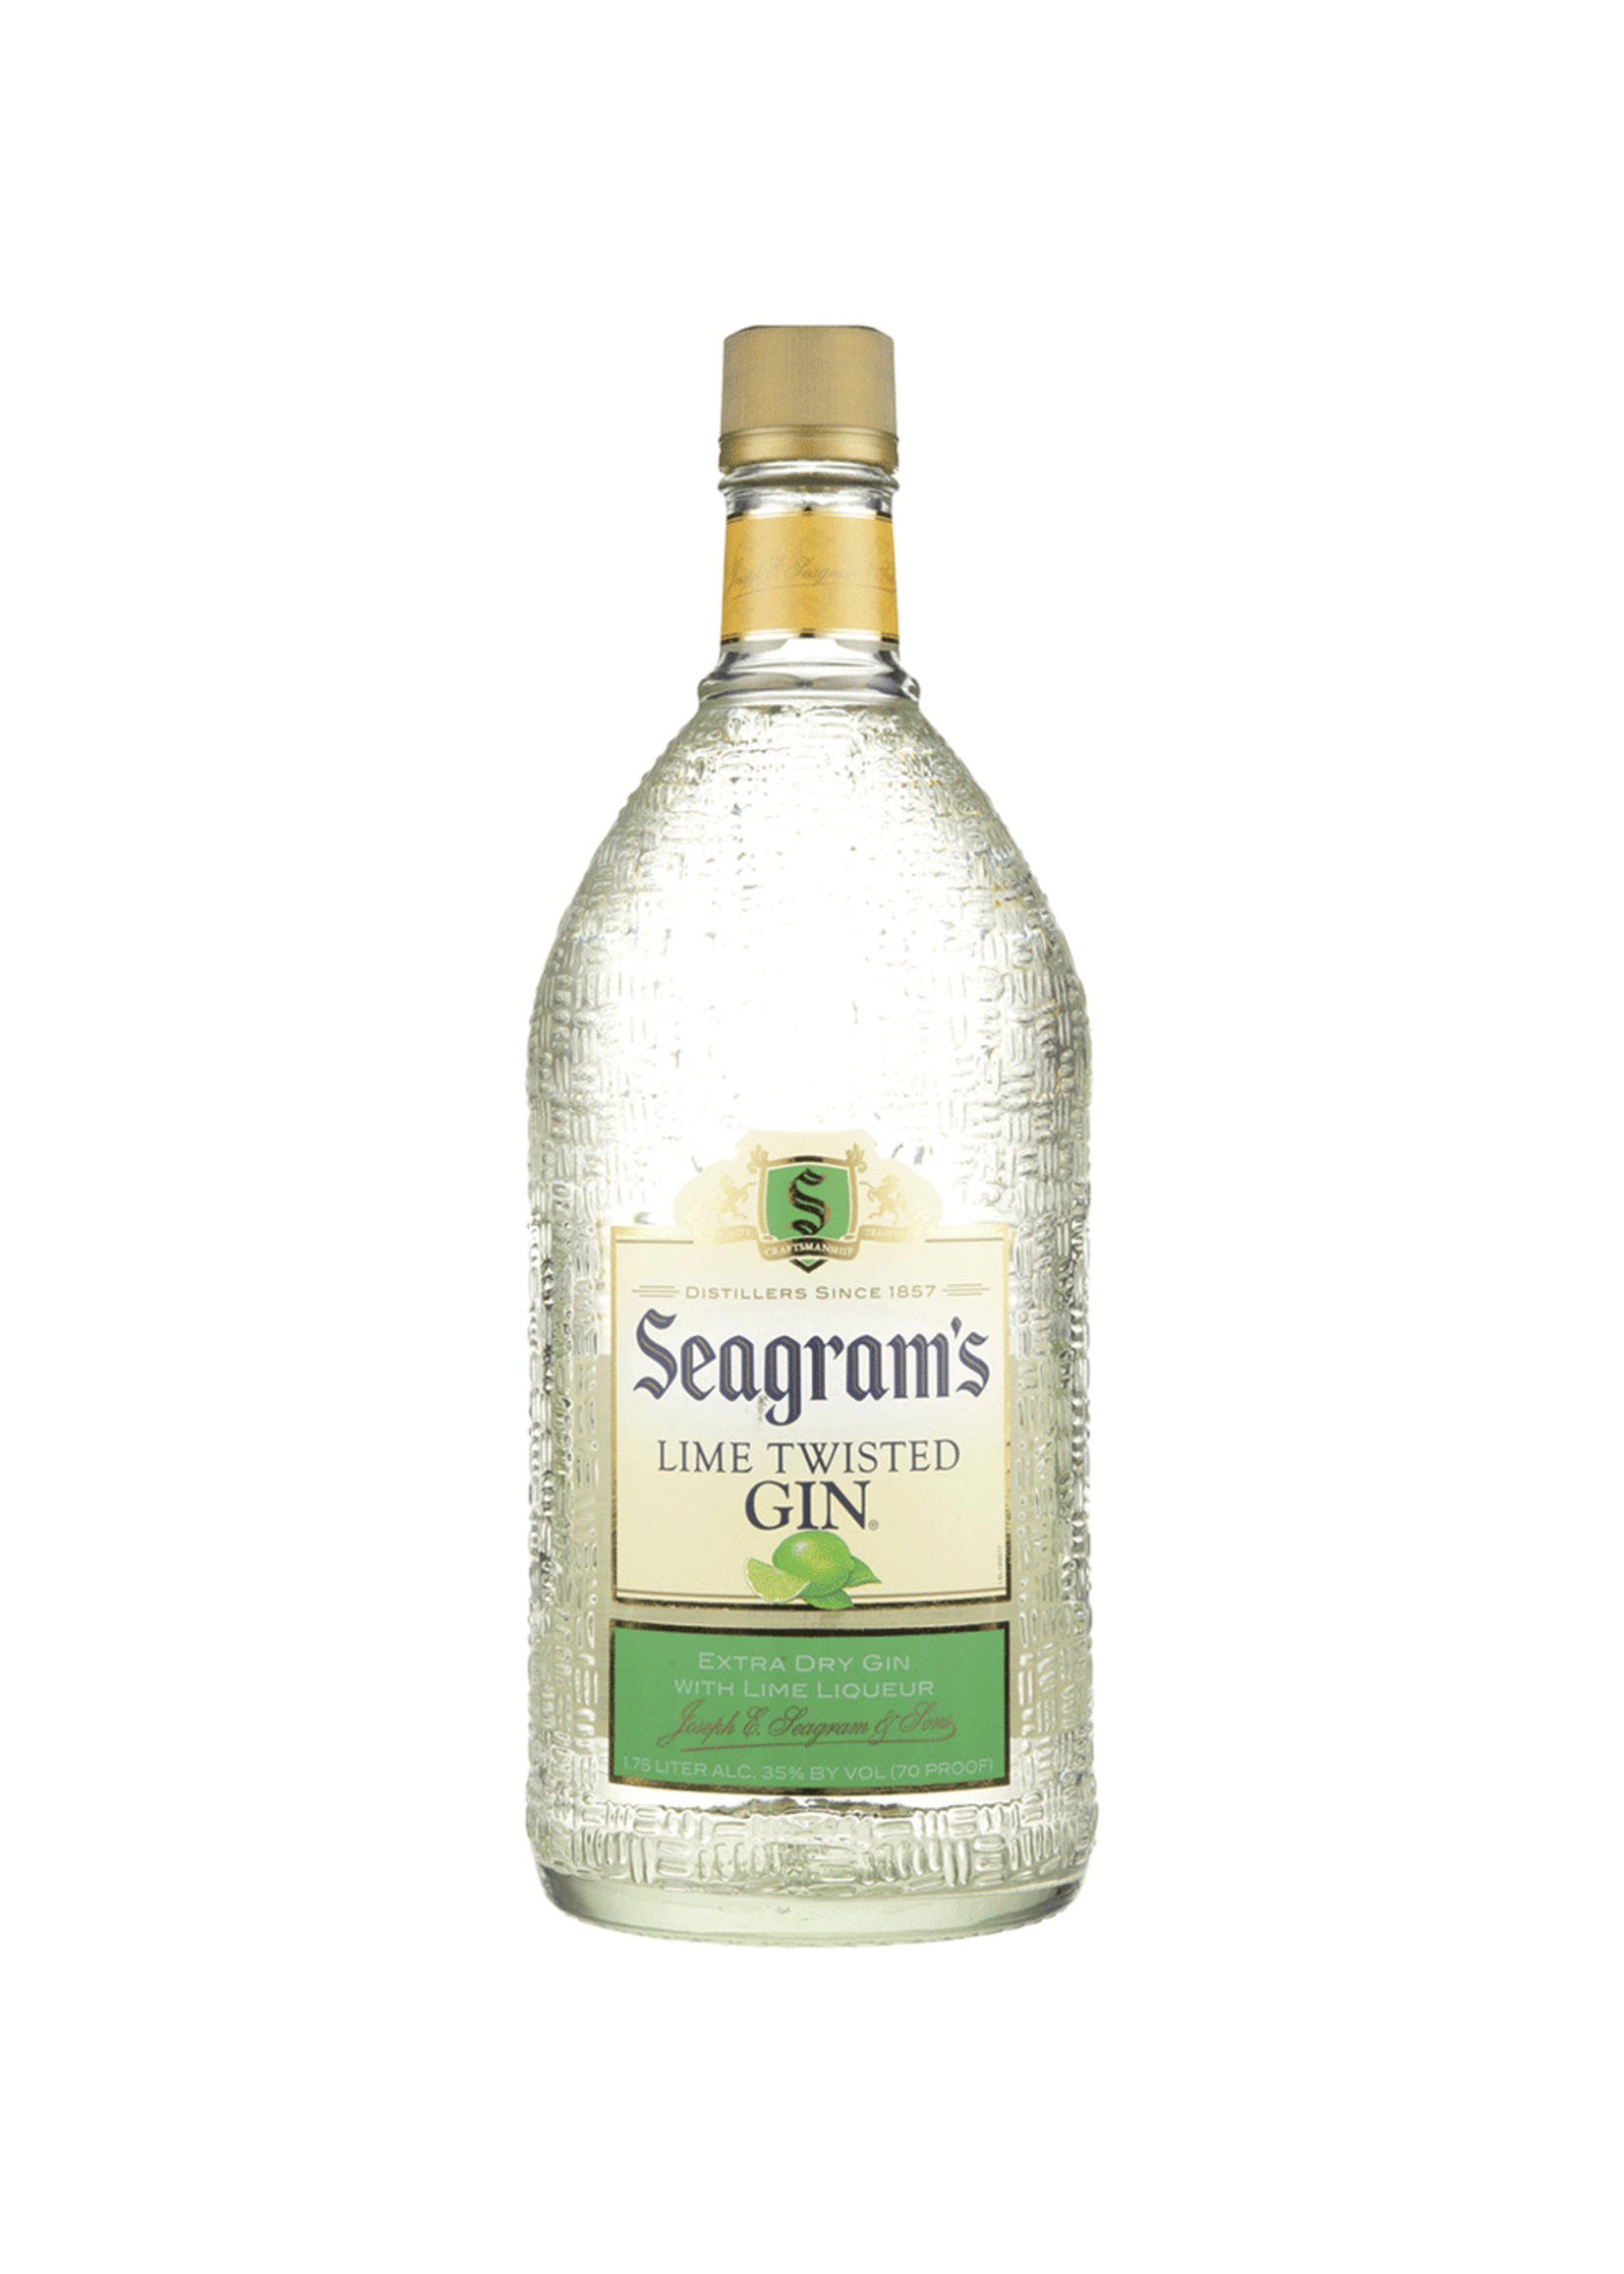 Seagrams Twisted Lime Gin 70Proof 1.75 Ltr